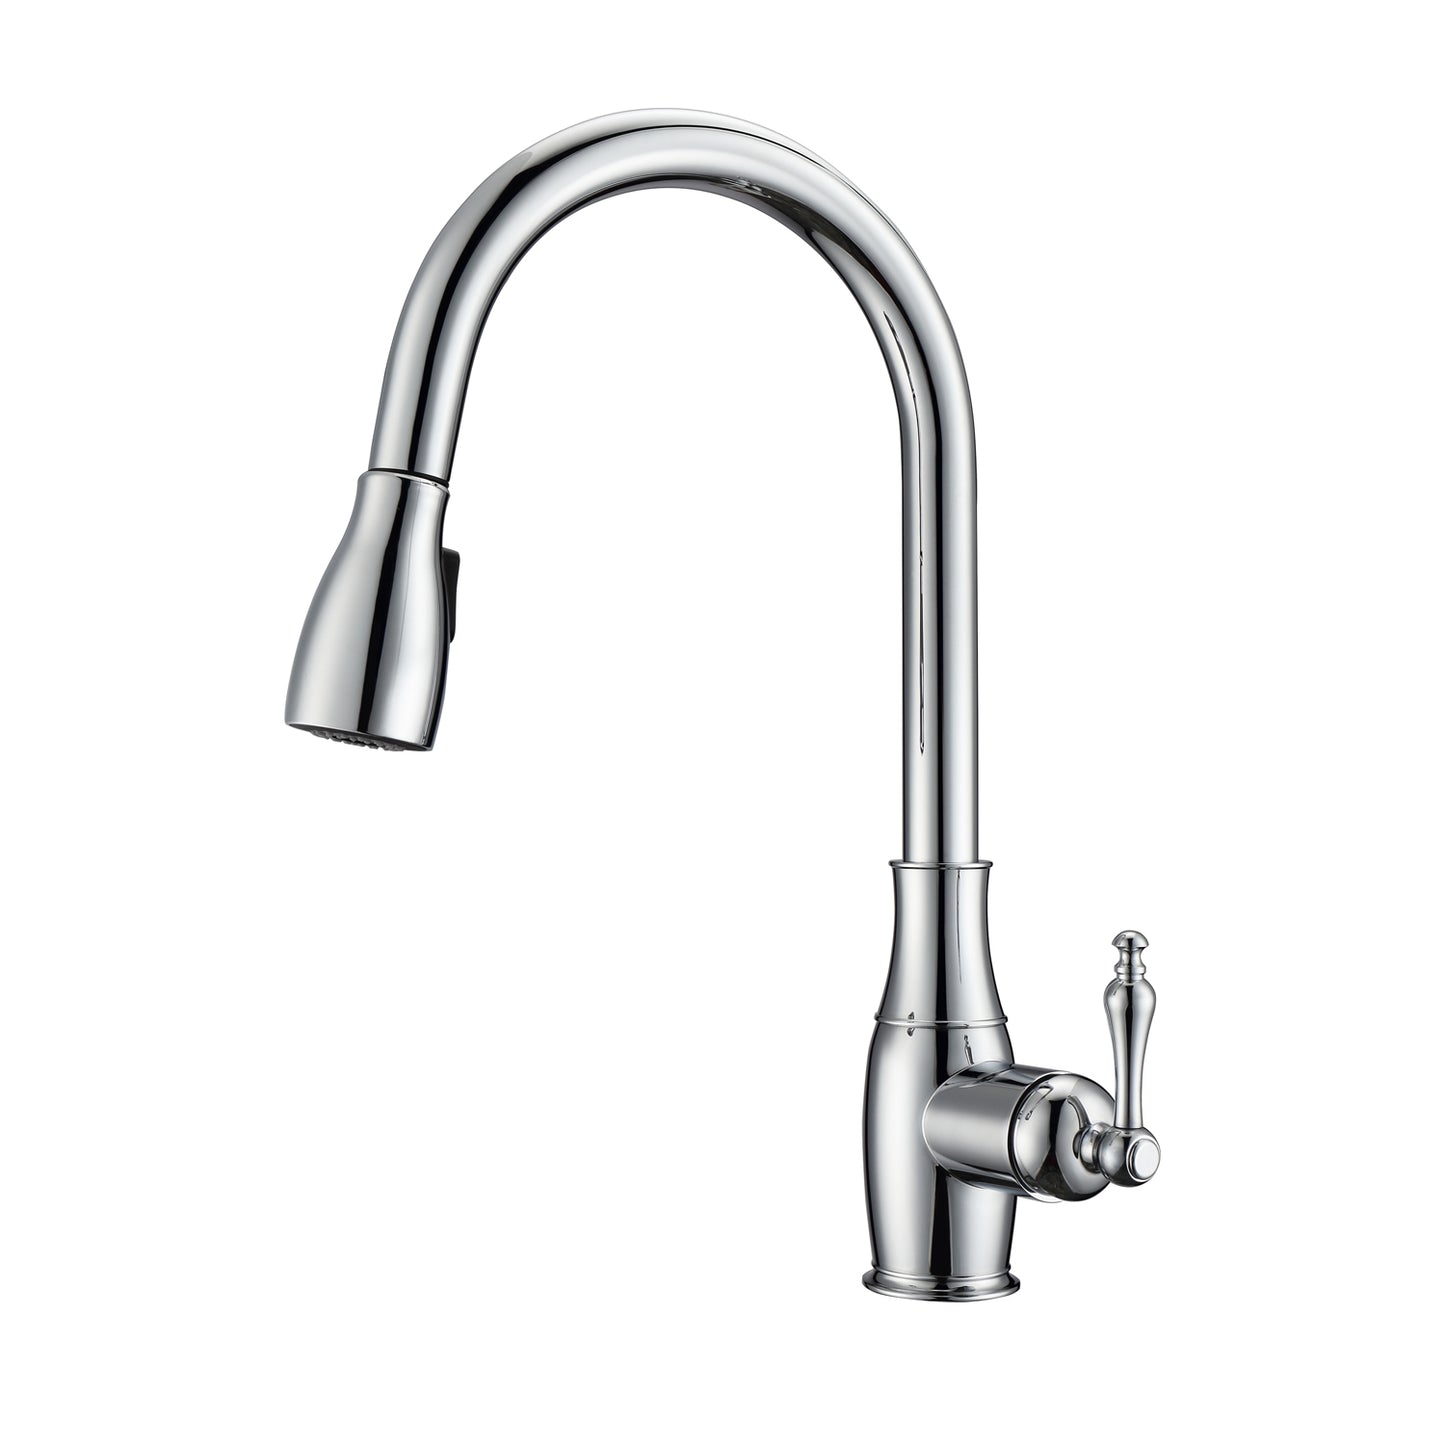 Cullen 1 Kitchen Faucet, Pull-Out Sprayer, Single Lever Handle, Chrome